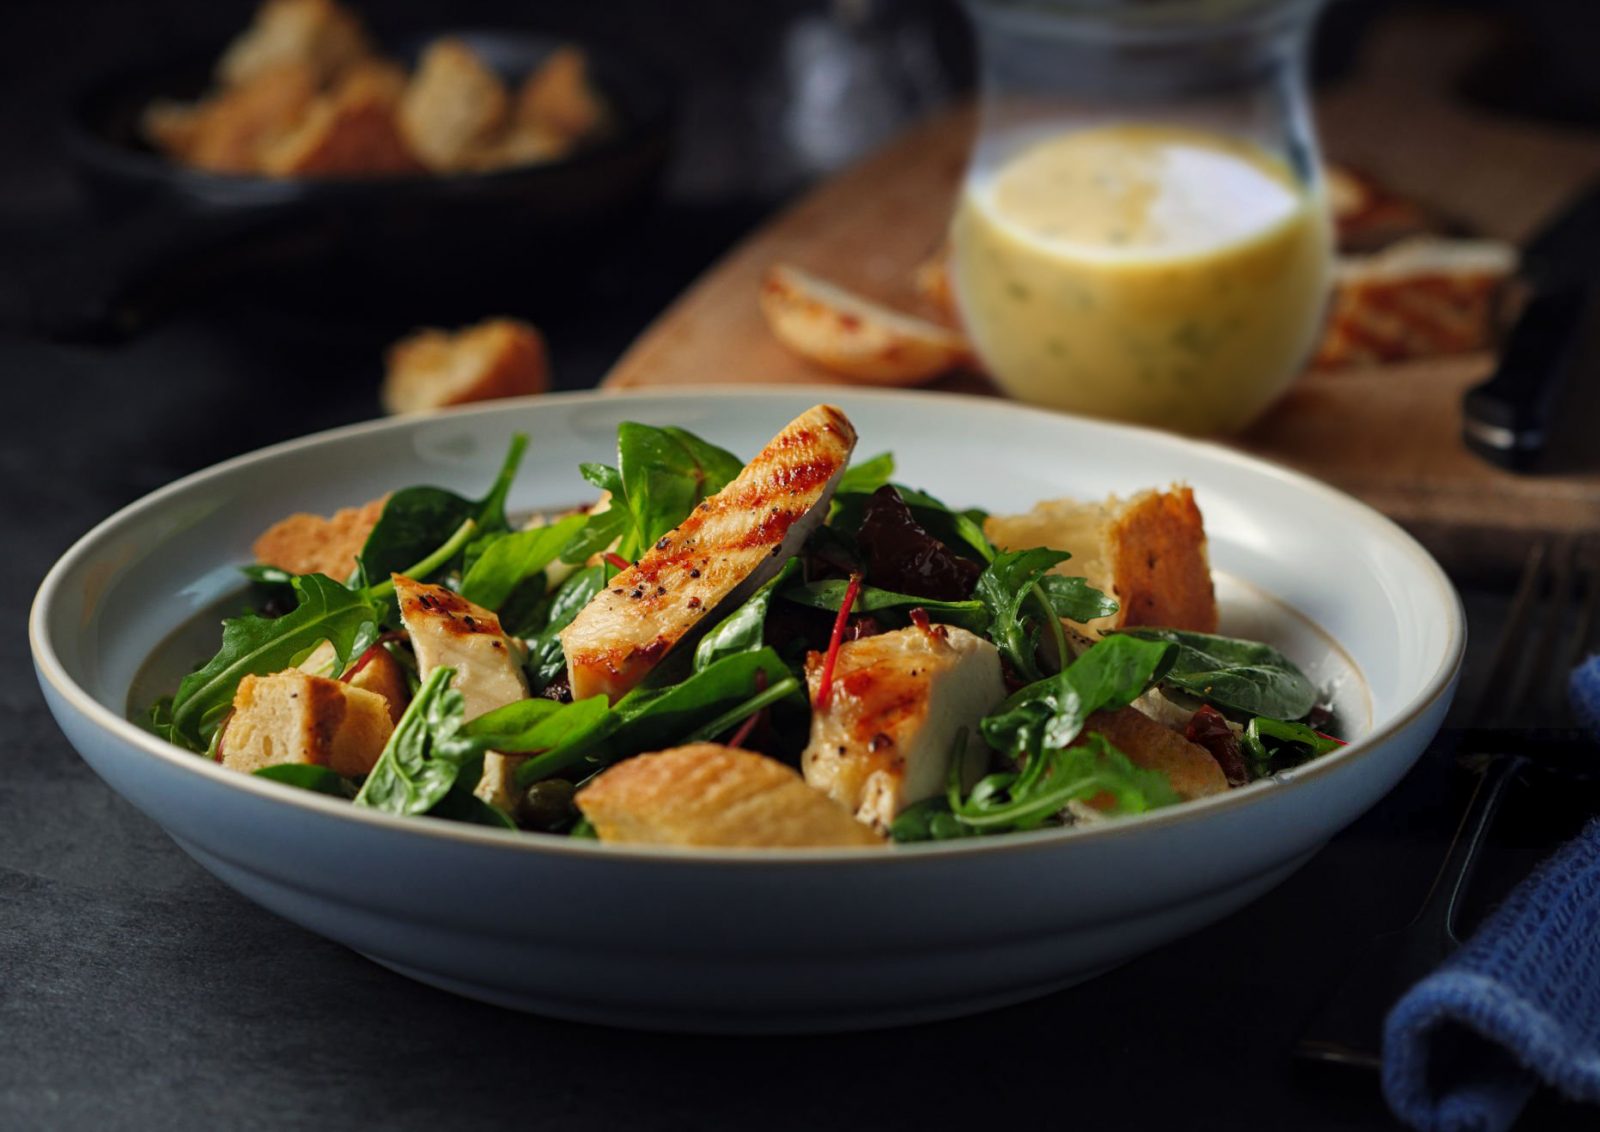 Chicken, Spinach, Grilled Pear and Smoked Mozzarella Salad